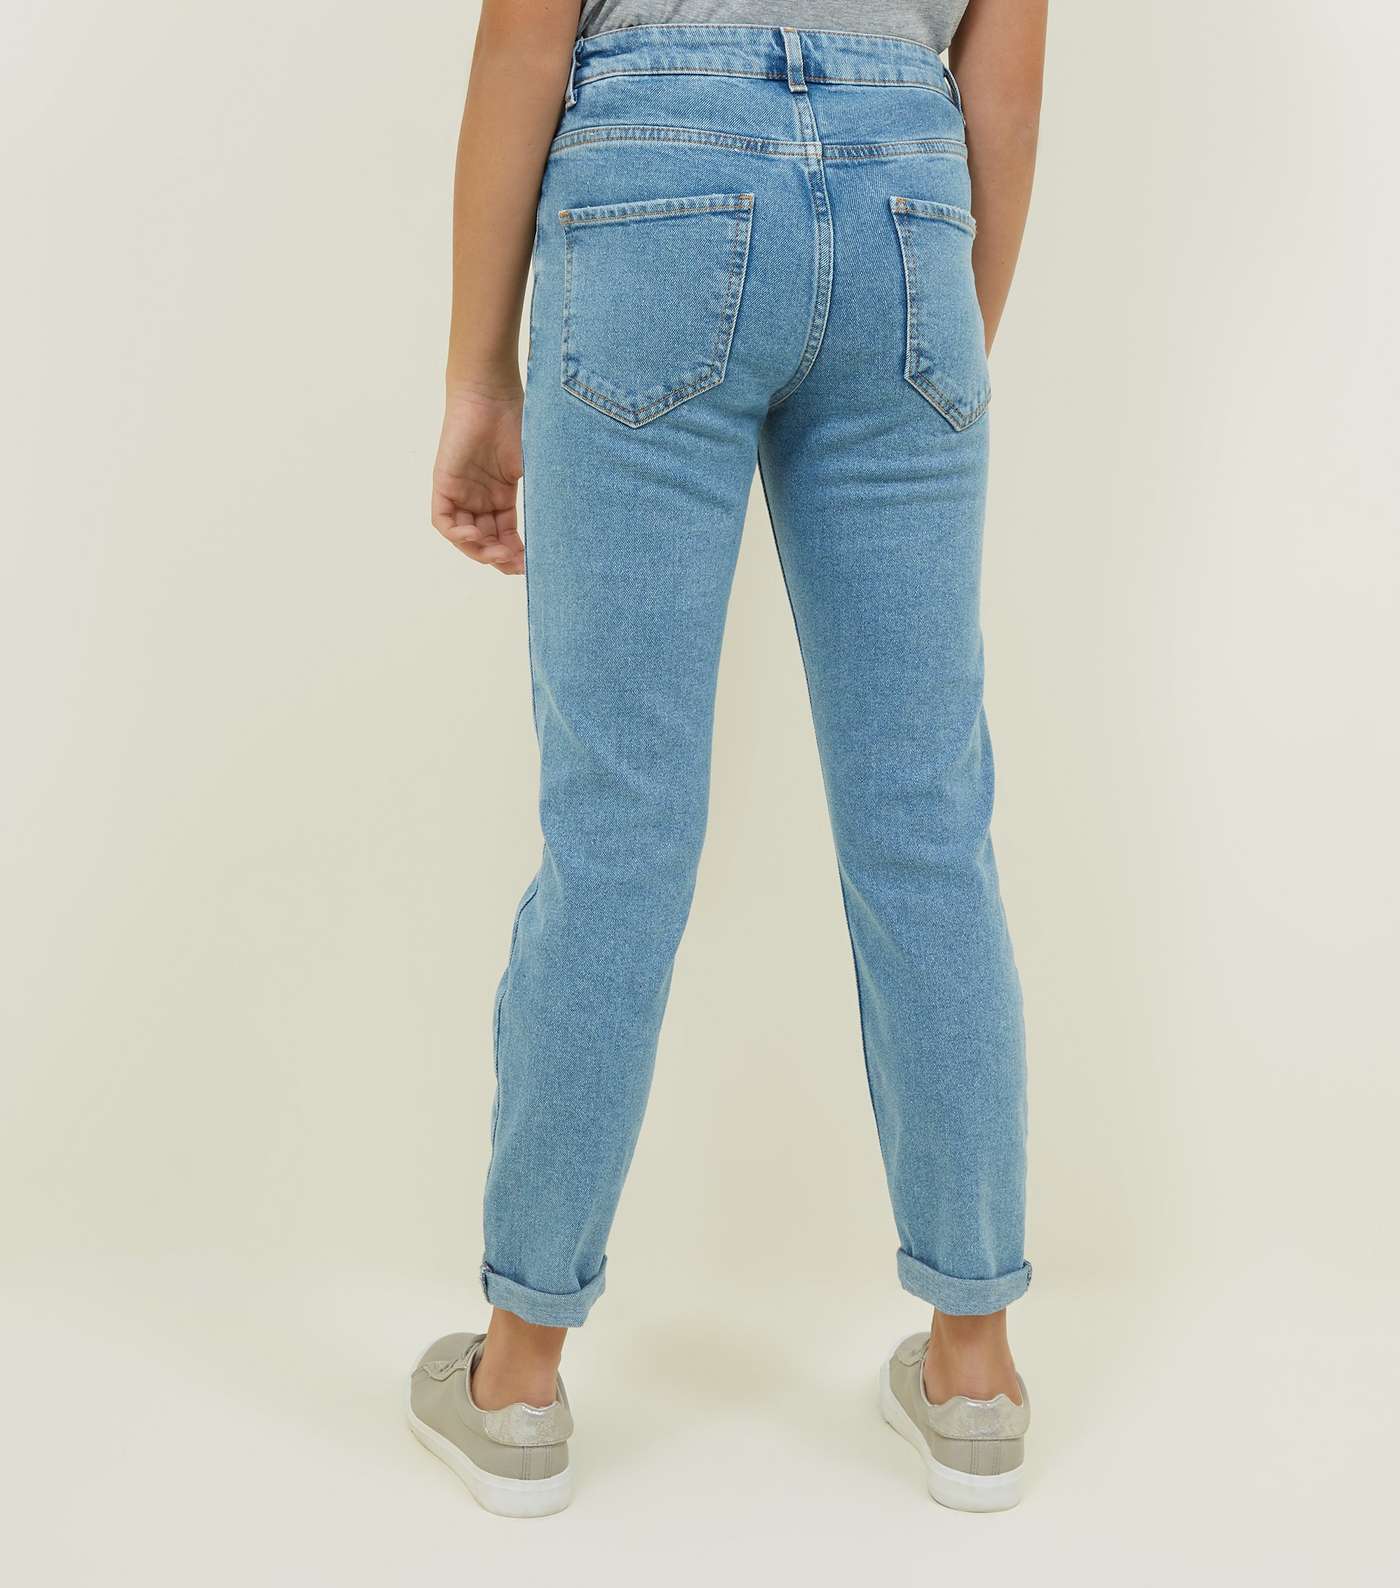 Girls Blue Ripped Stretch Mom Jeans Image 3